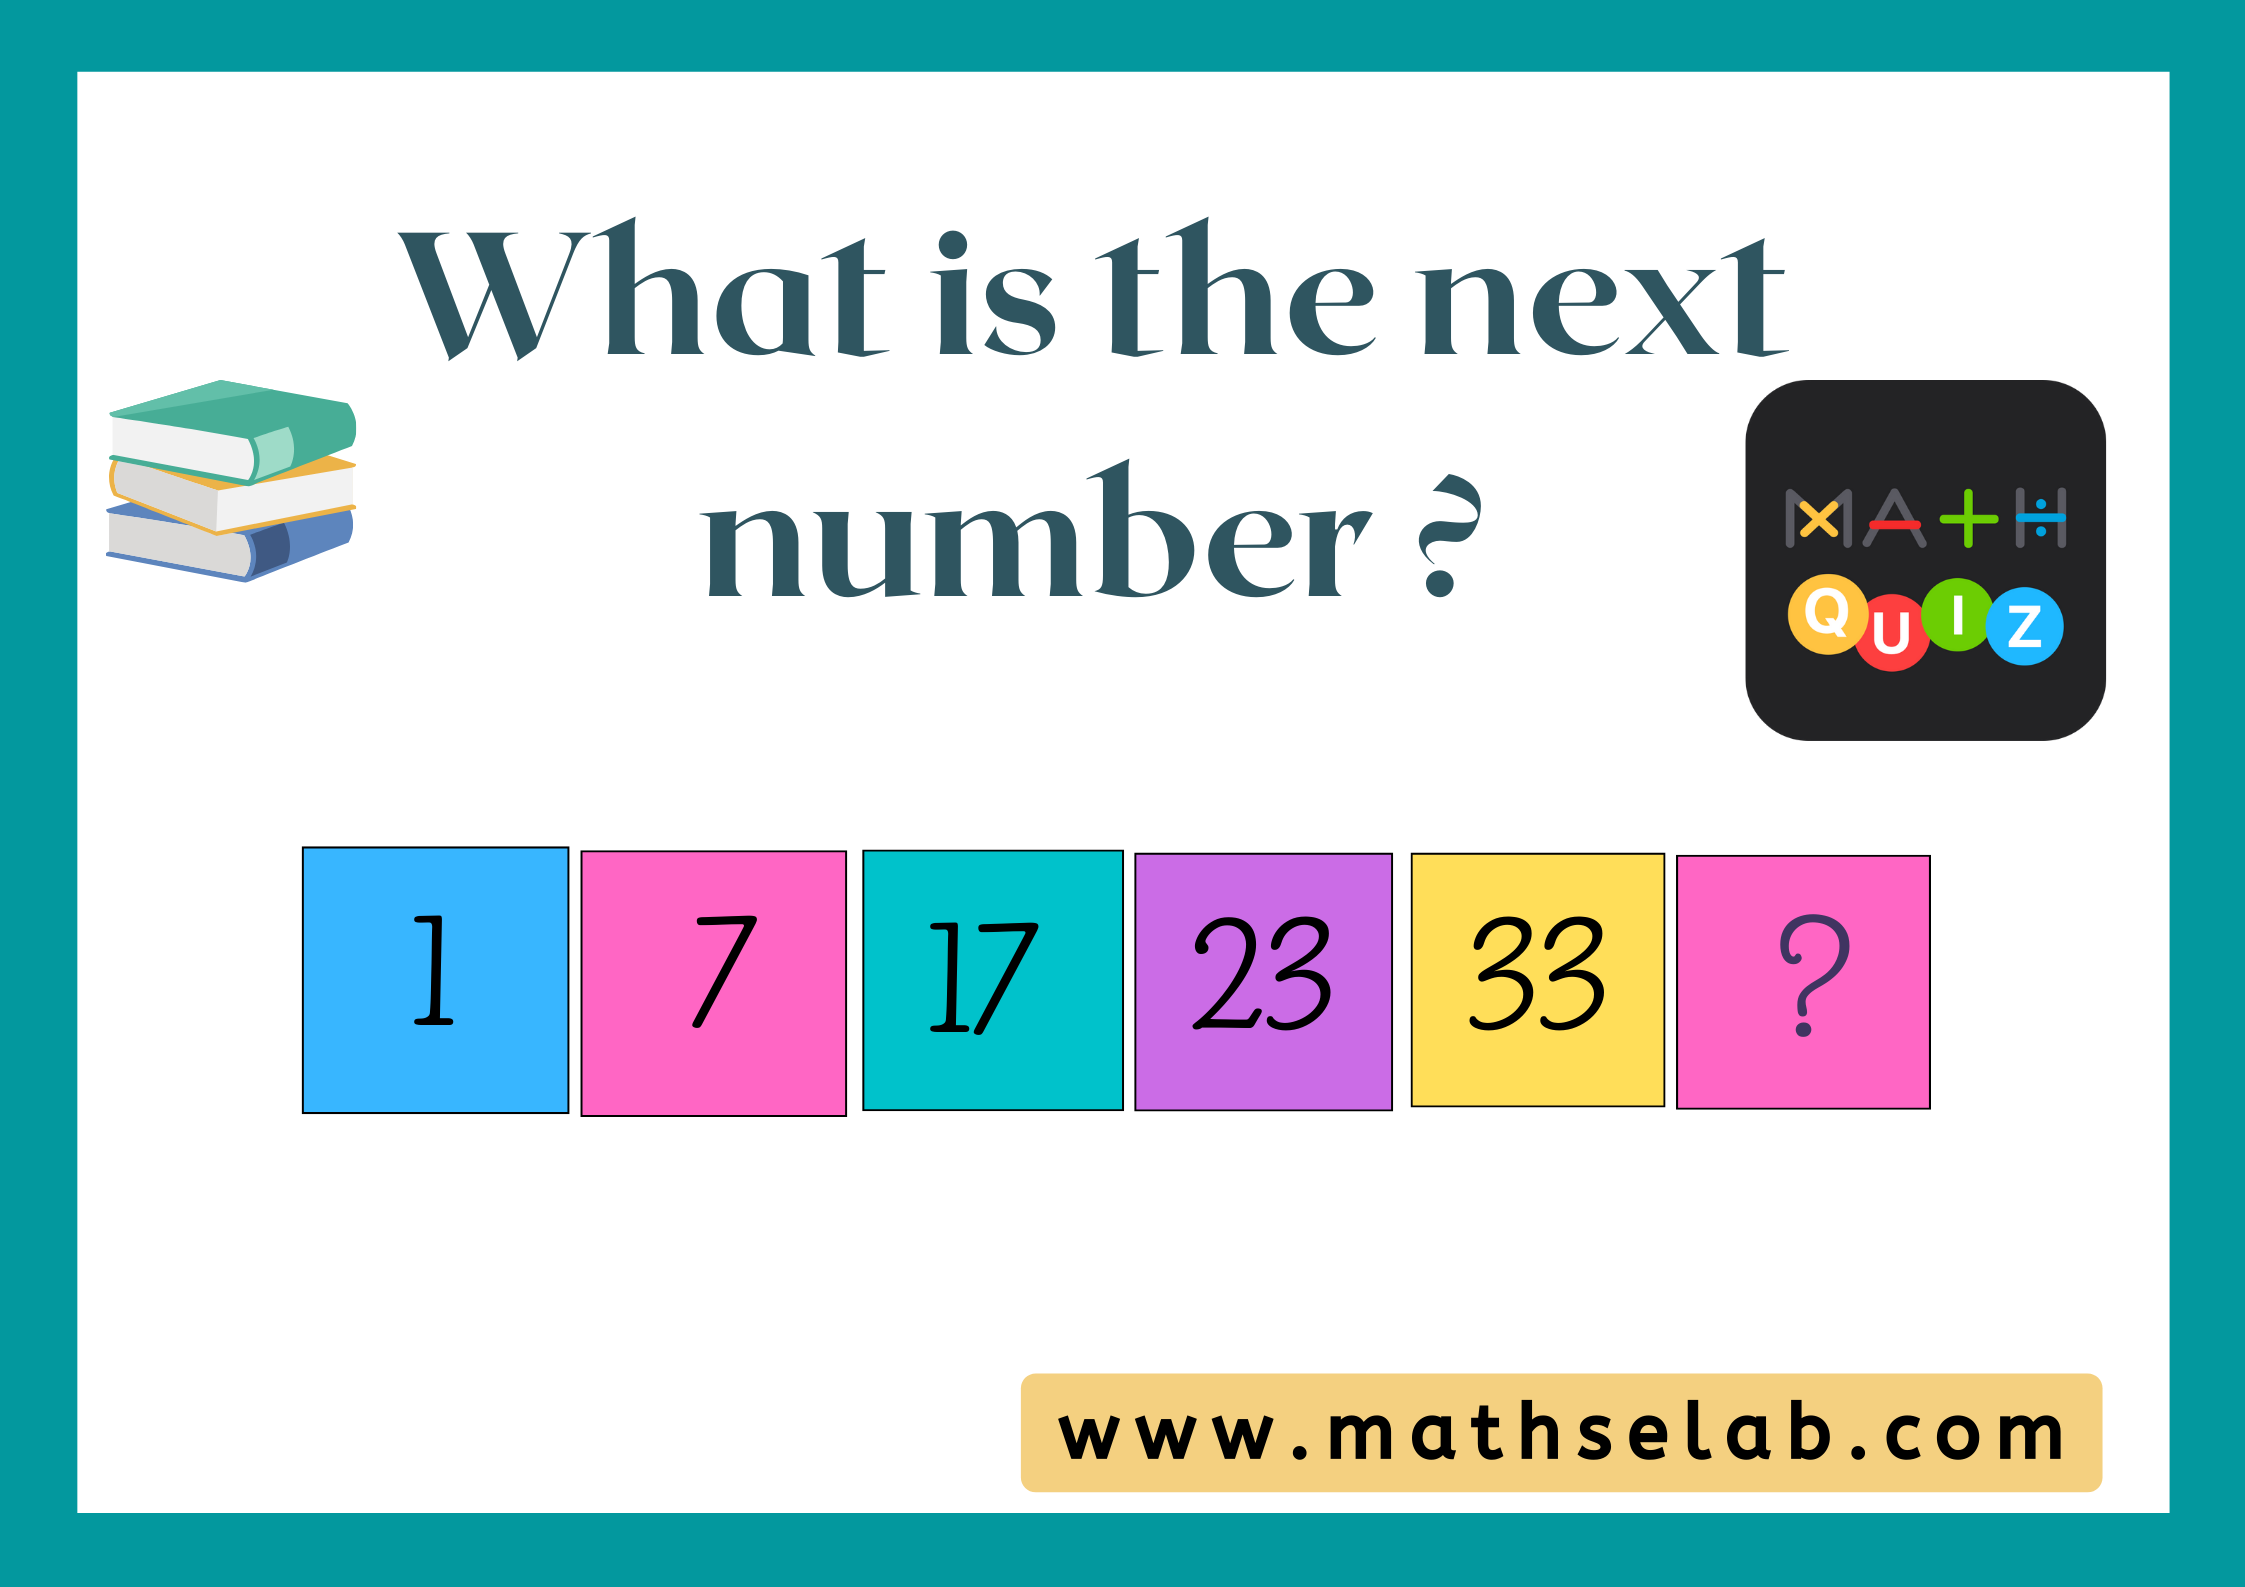 What is next number 1, 7, 17, 23, 33, ____?